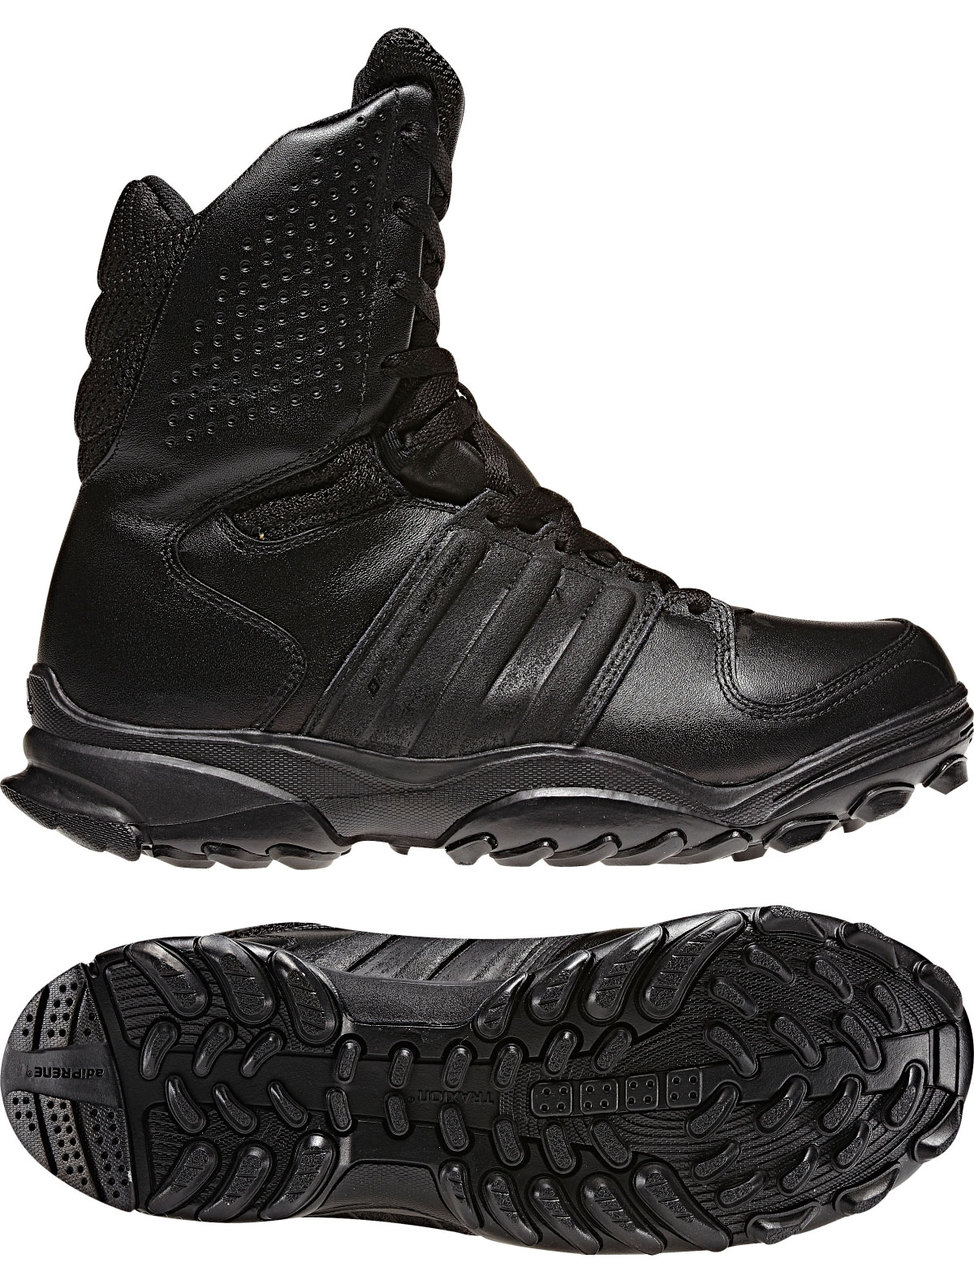 adidas security boots